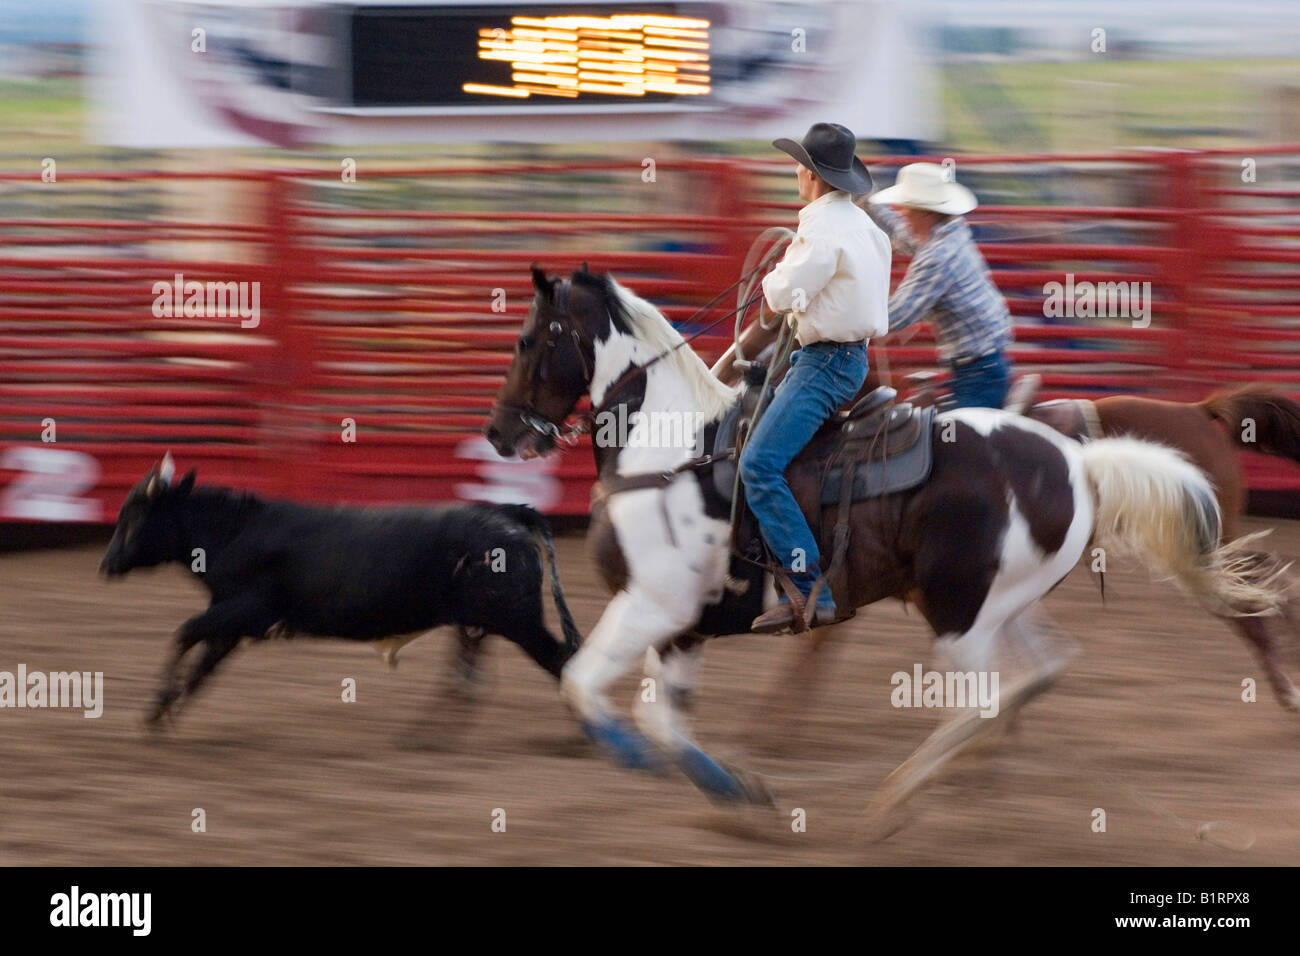 Catching calves in a rodeo, Utah, USA, North America Stock Photo